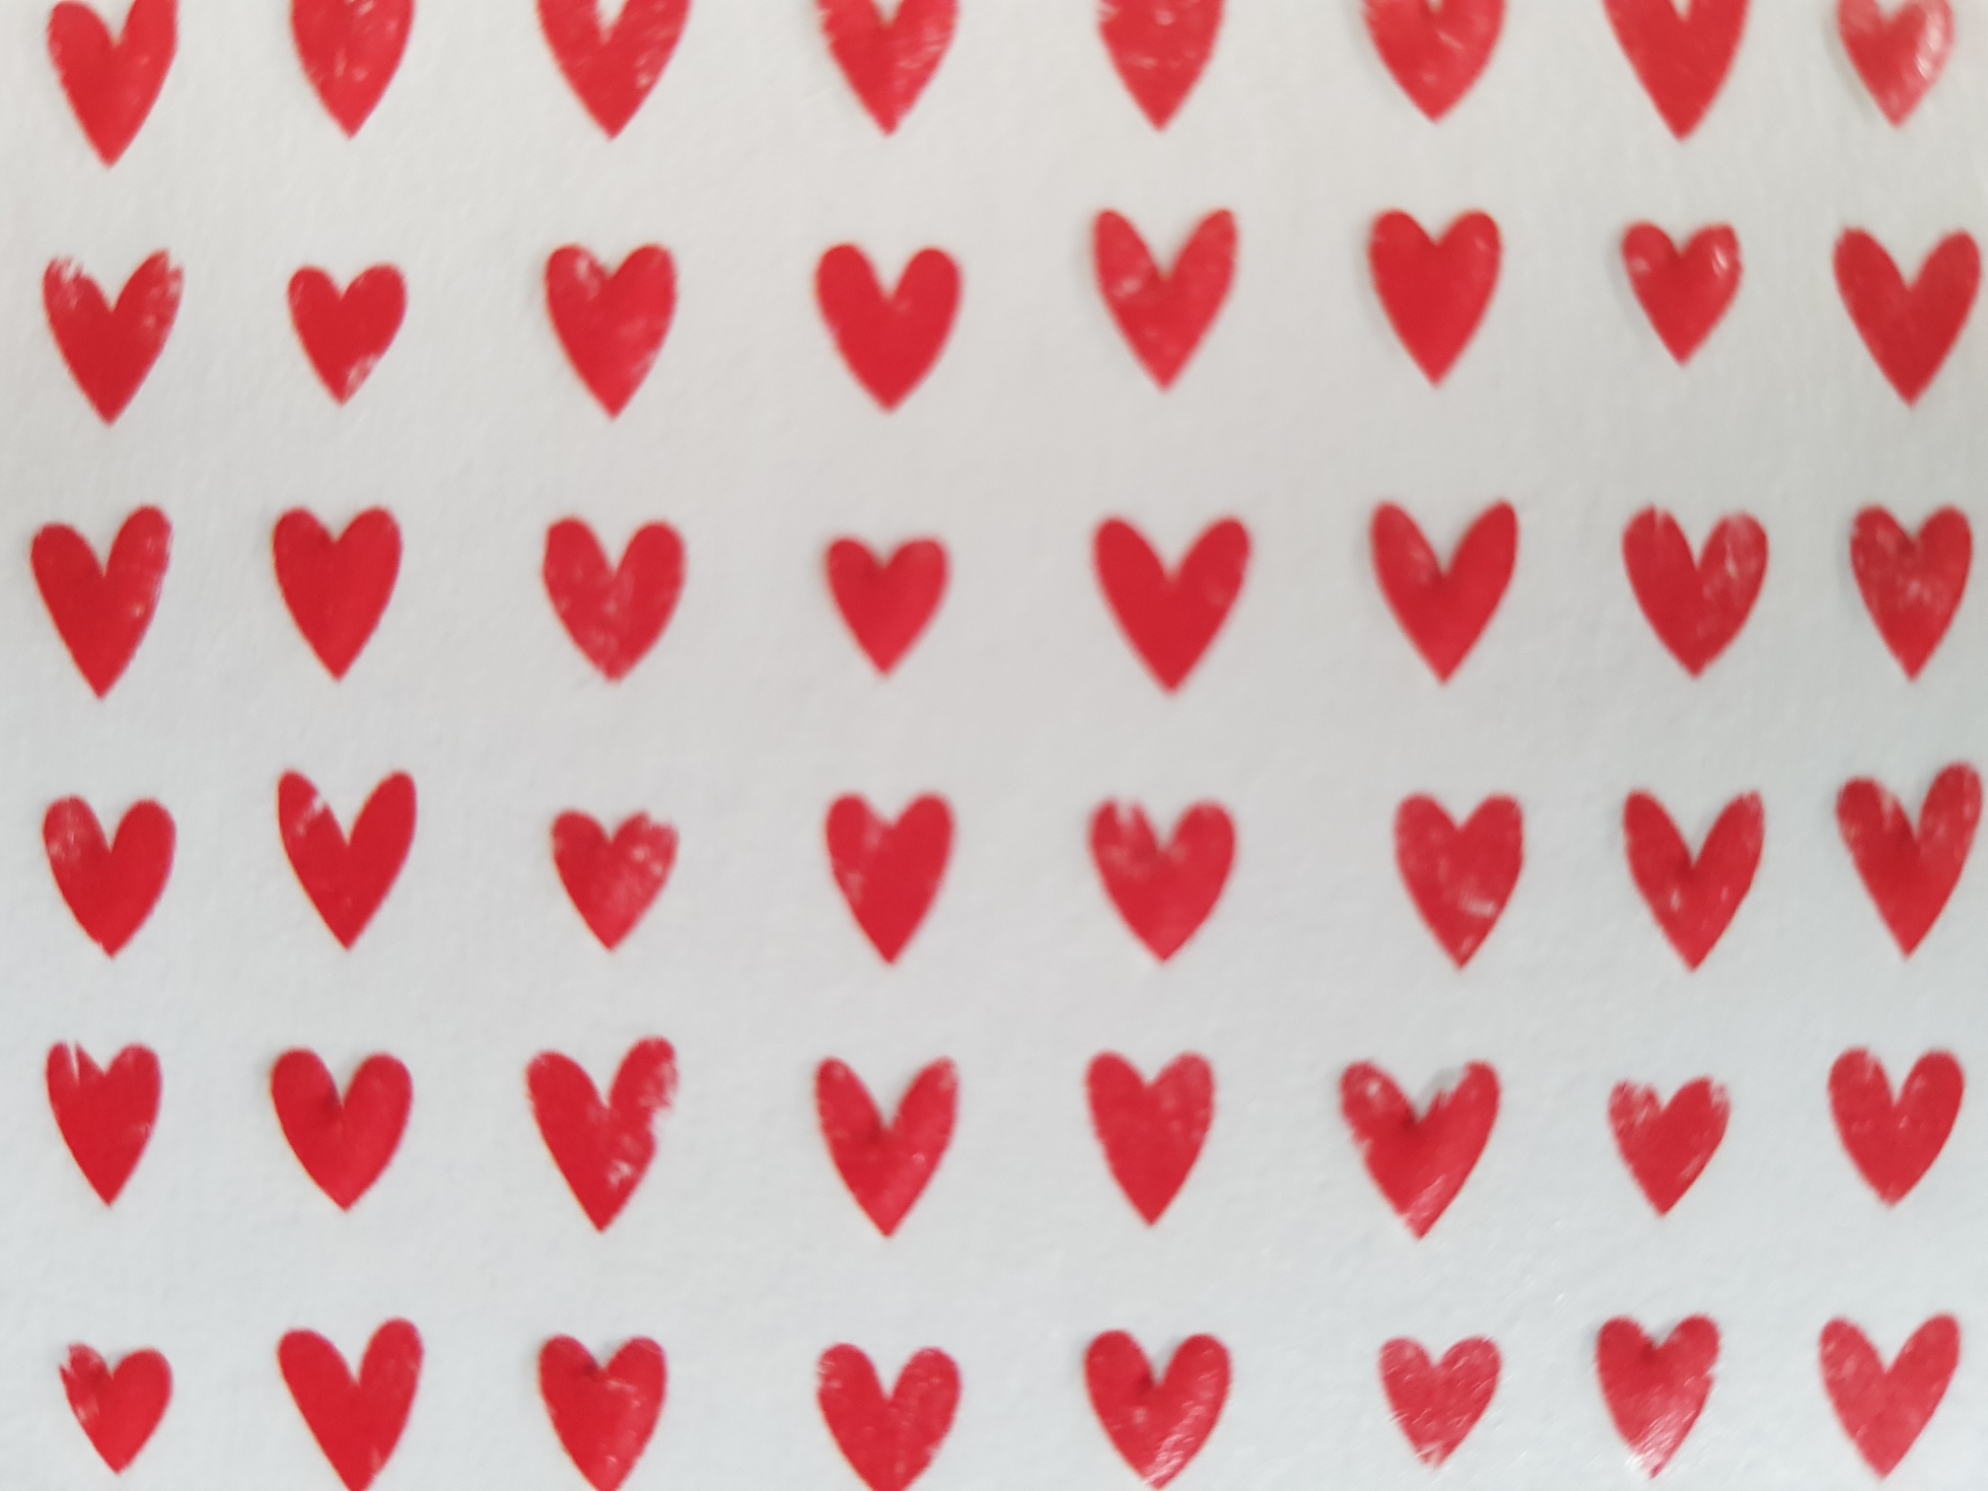 Image of rows of small red hearts painted onto white card